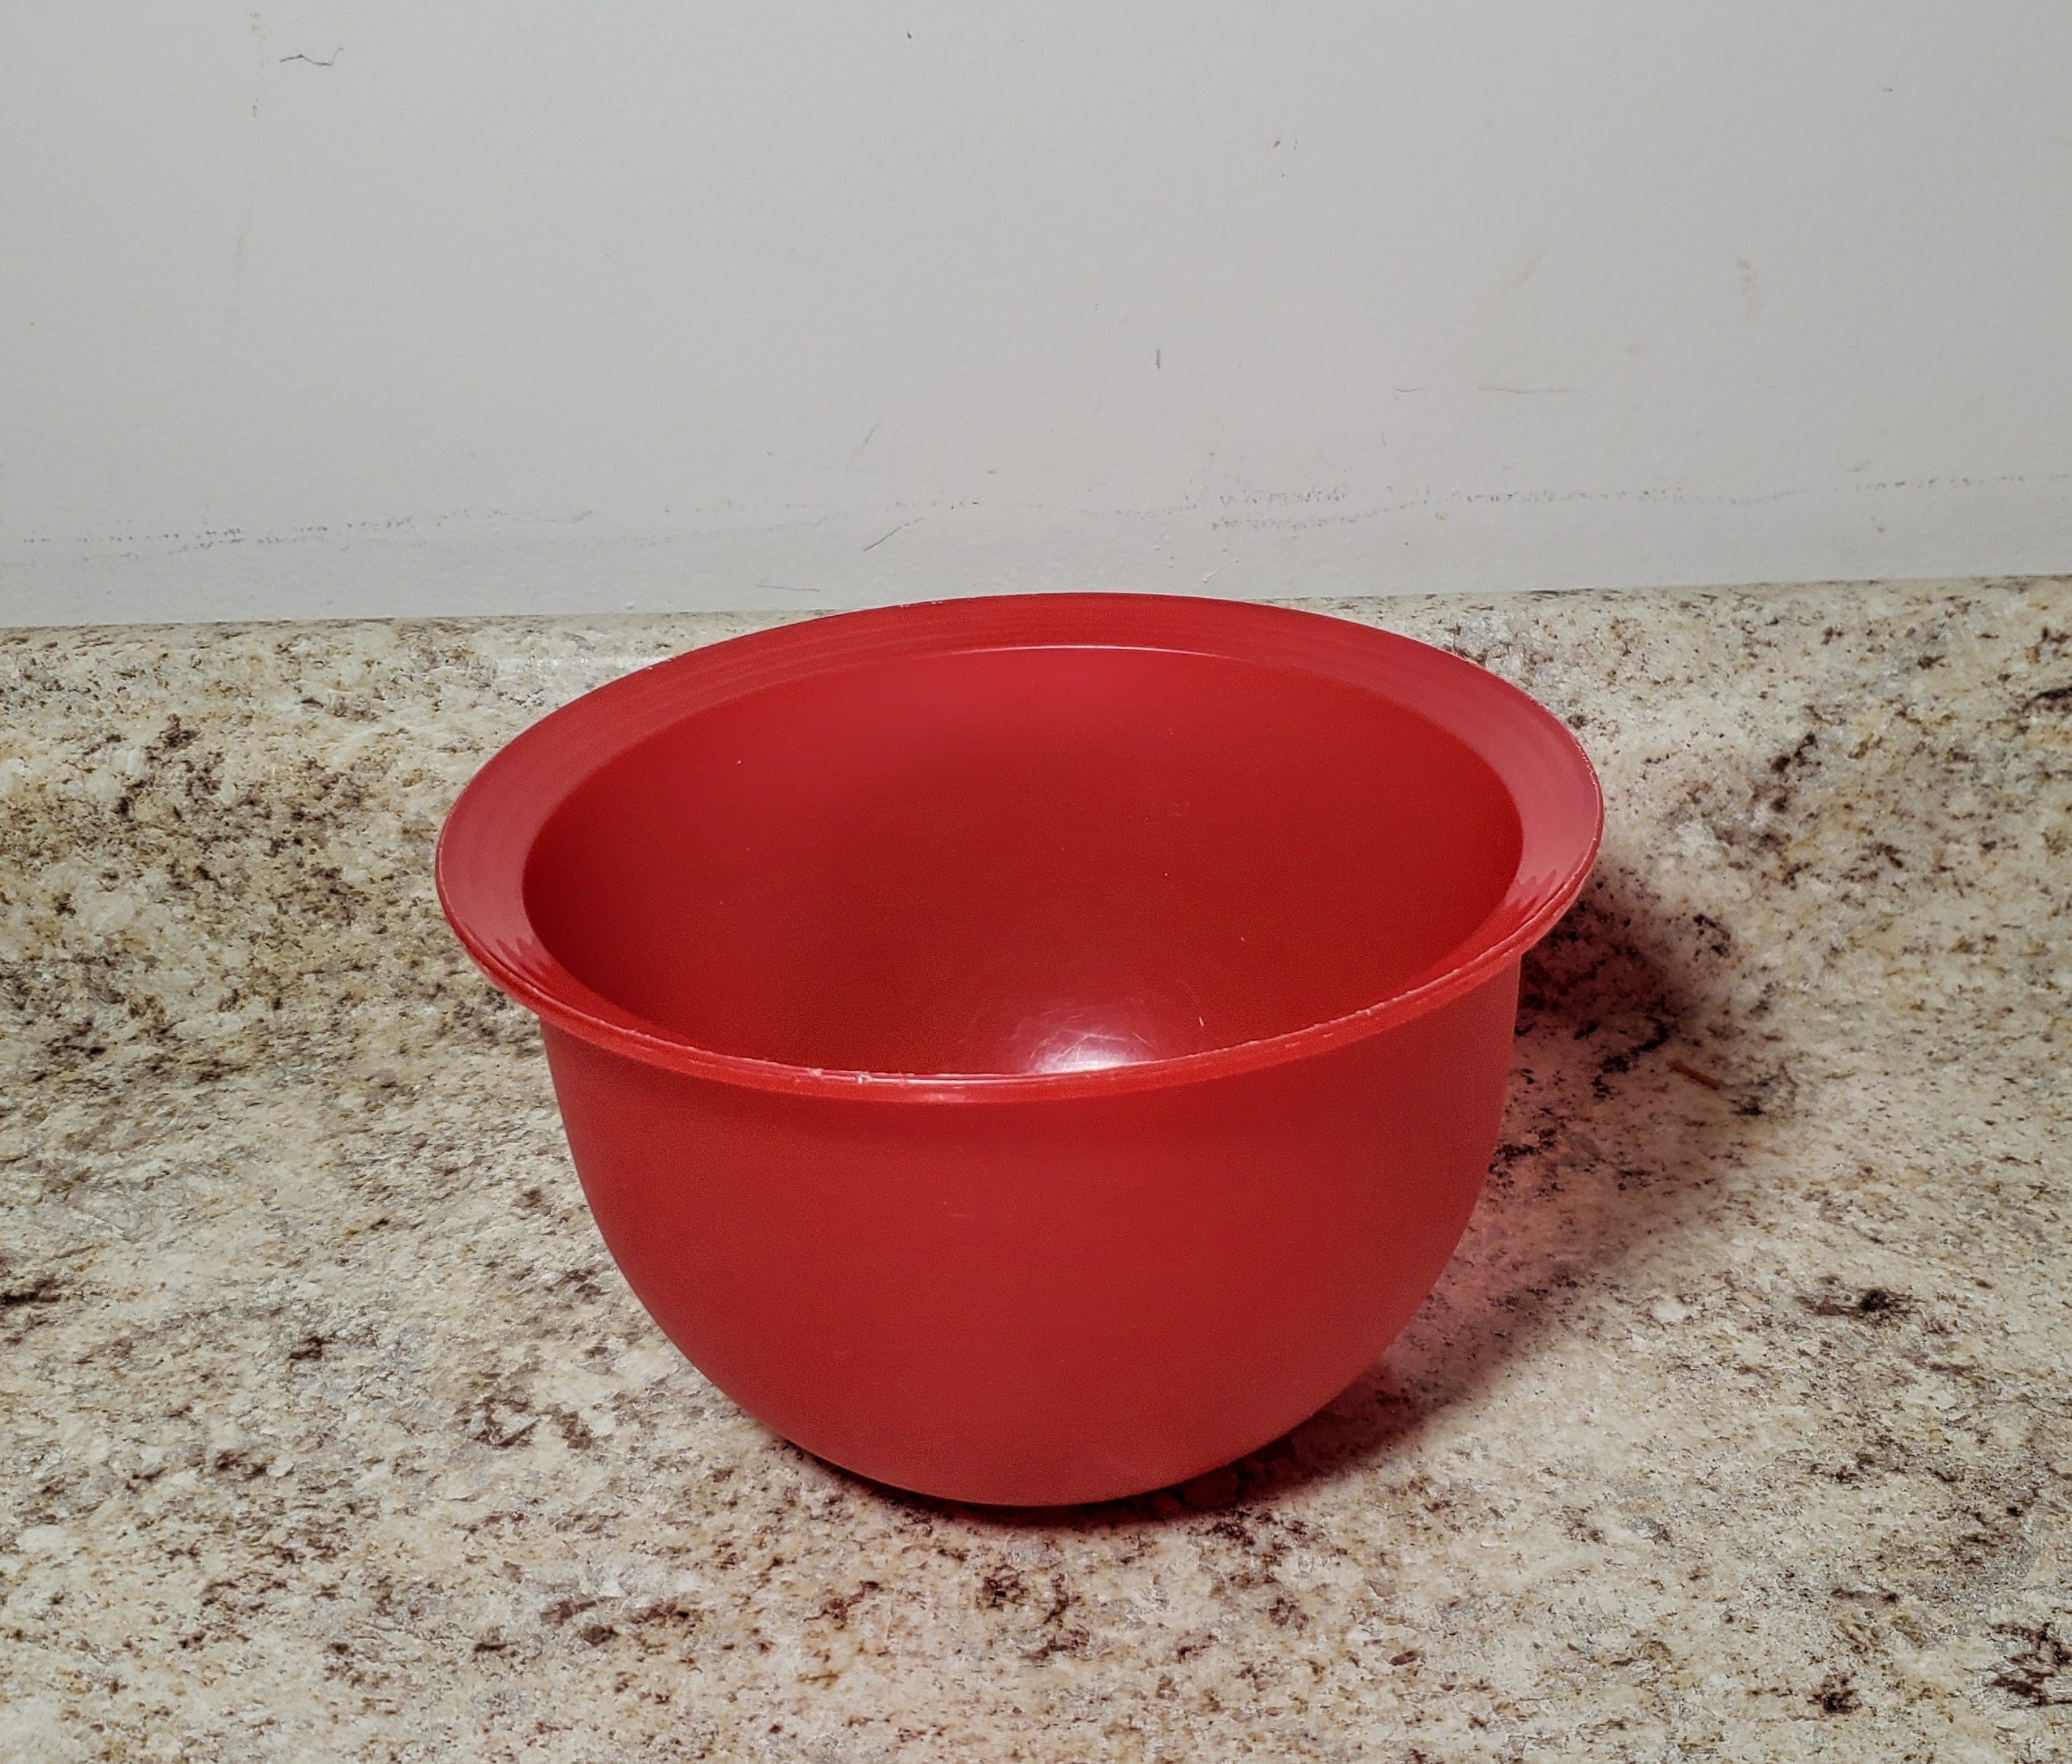 Vintage Tupperware Mixing Bowls - household items - by owner